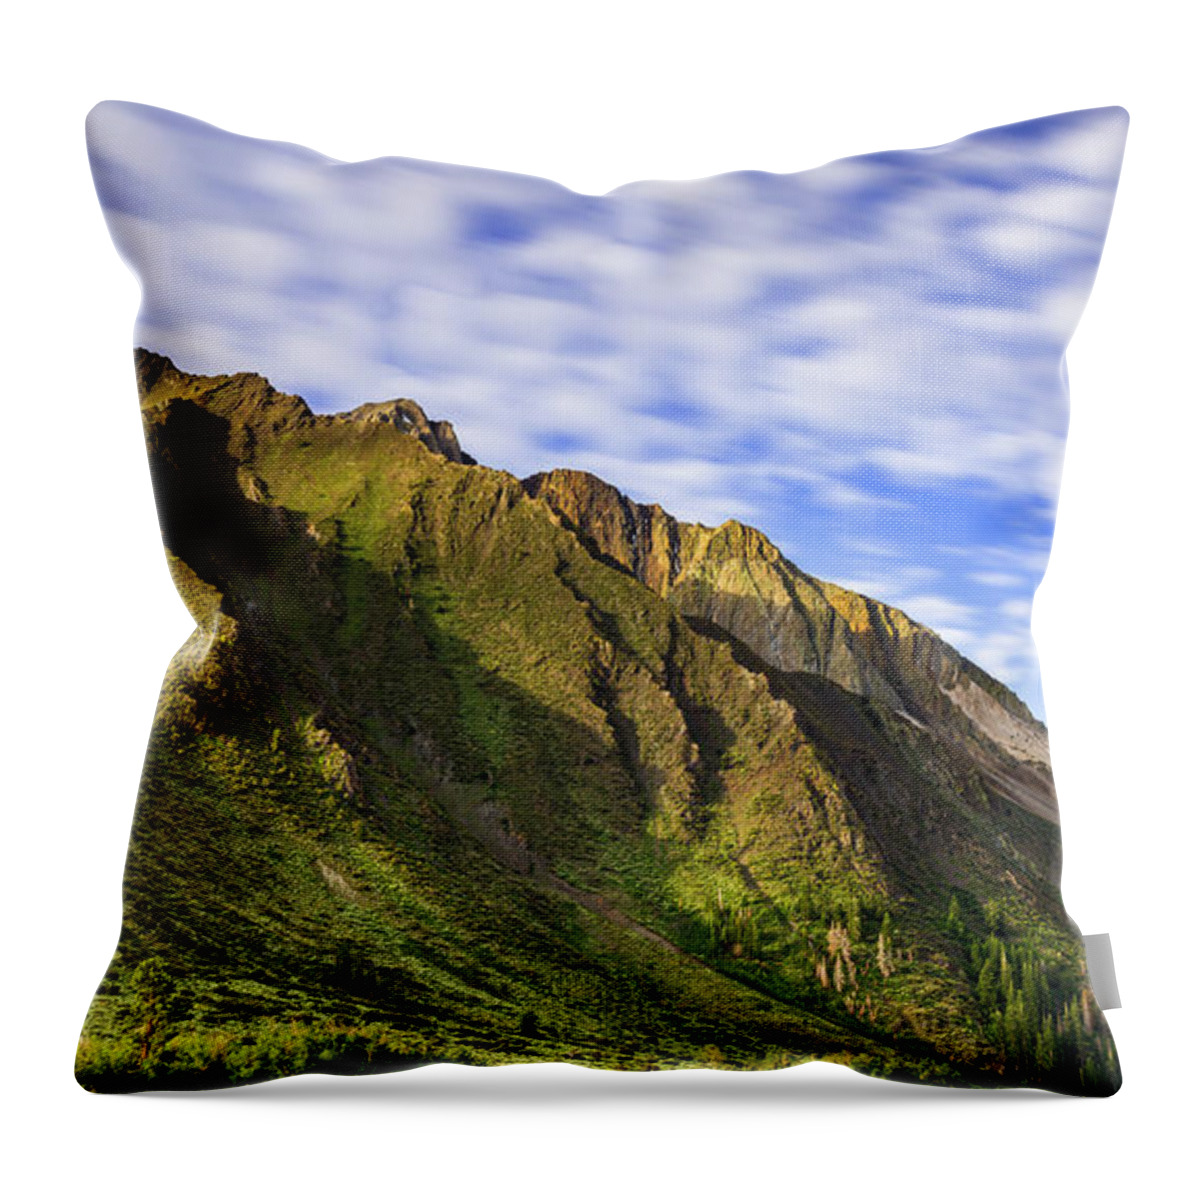 Sherwin Range Throw Pillow featuring the photograph Sherwin Range by Anthony Michael Bonafede